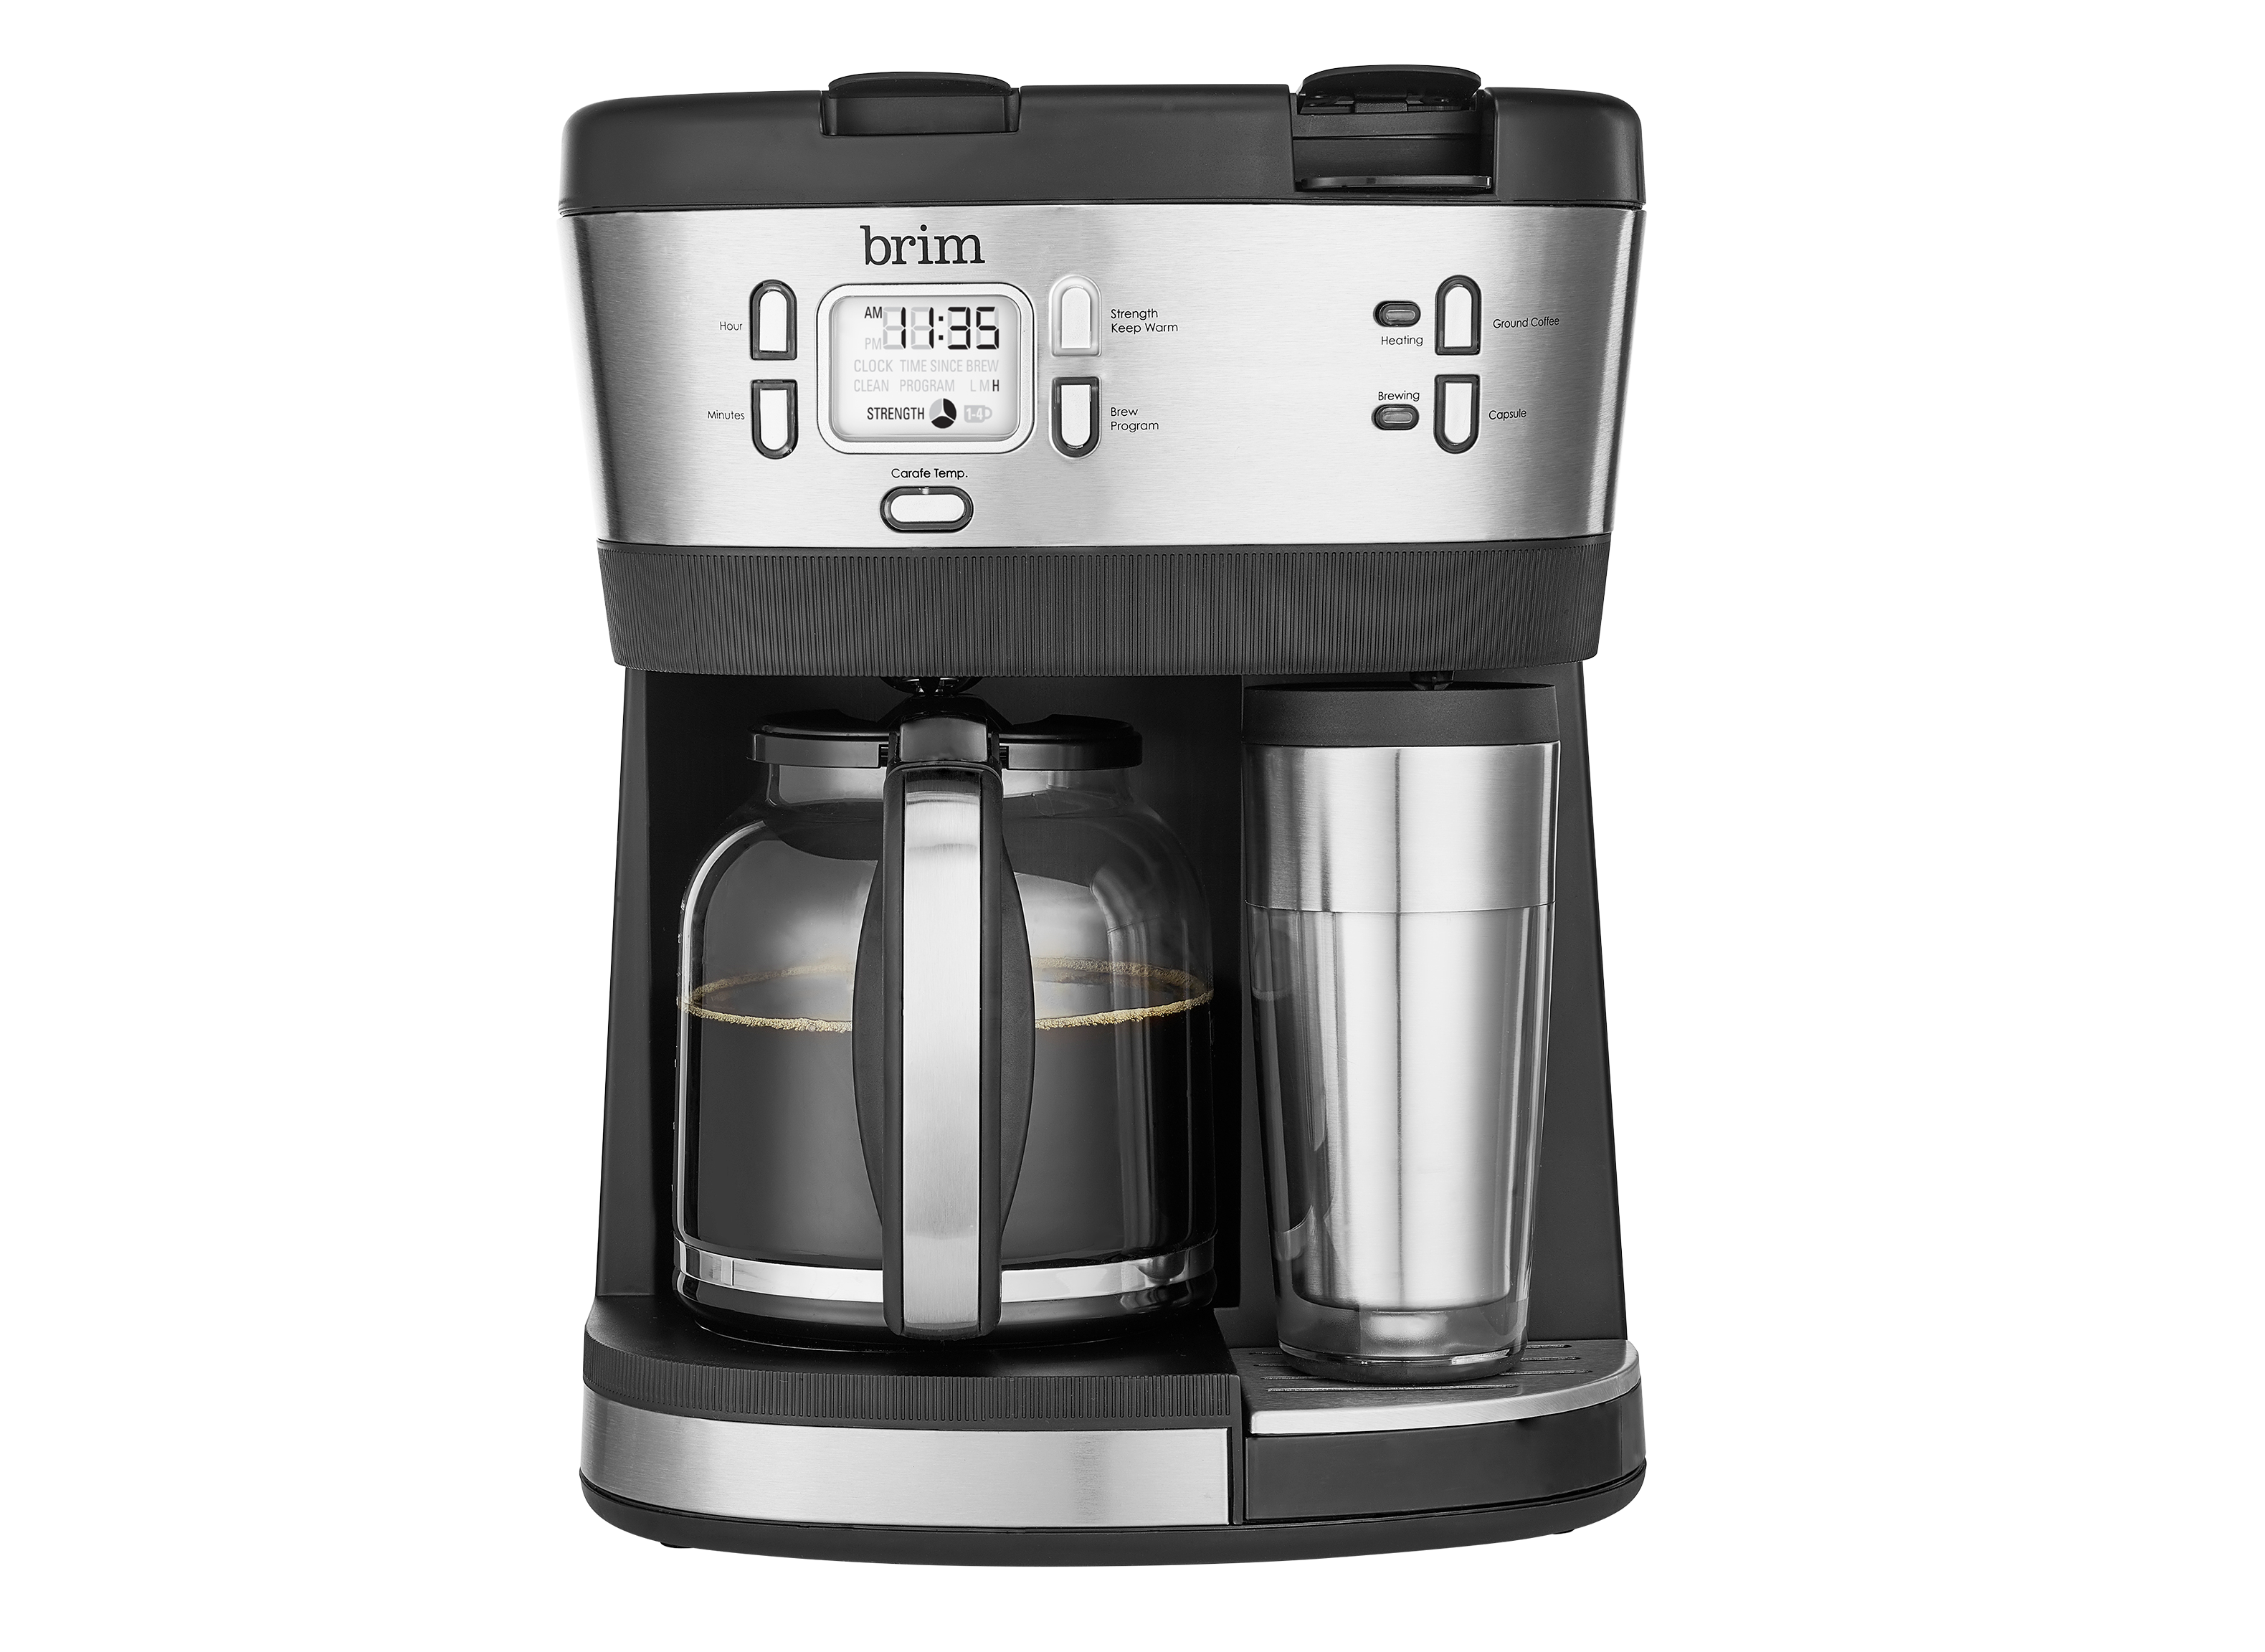 https://crdms.images.consumerreports.org/prod/products/cr/models/412814-dual-coffee-makers-brim-triple-brew-12-cup-50017-10037411.png